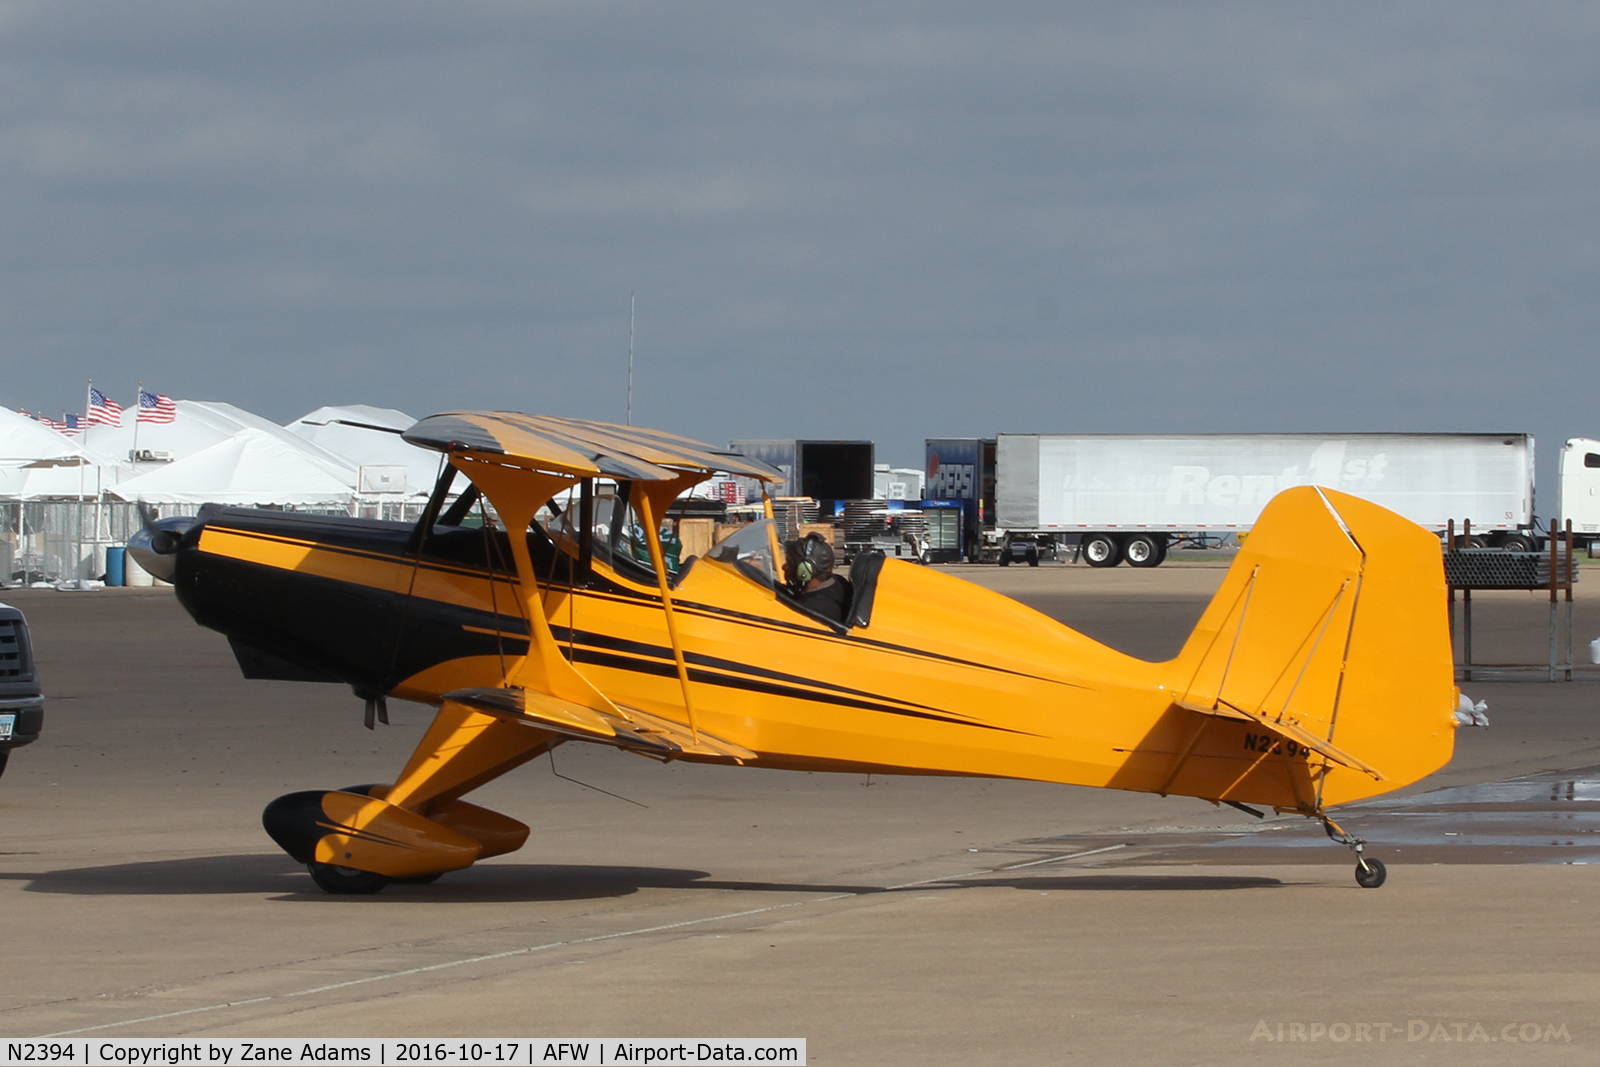 N2394, 1975 Stolp SA-300 Starduster Too C/N WAM-1, At the 2016 Alliance Airshow - Fort Worth, TX